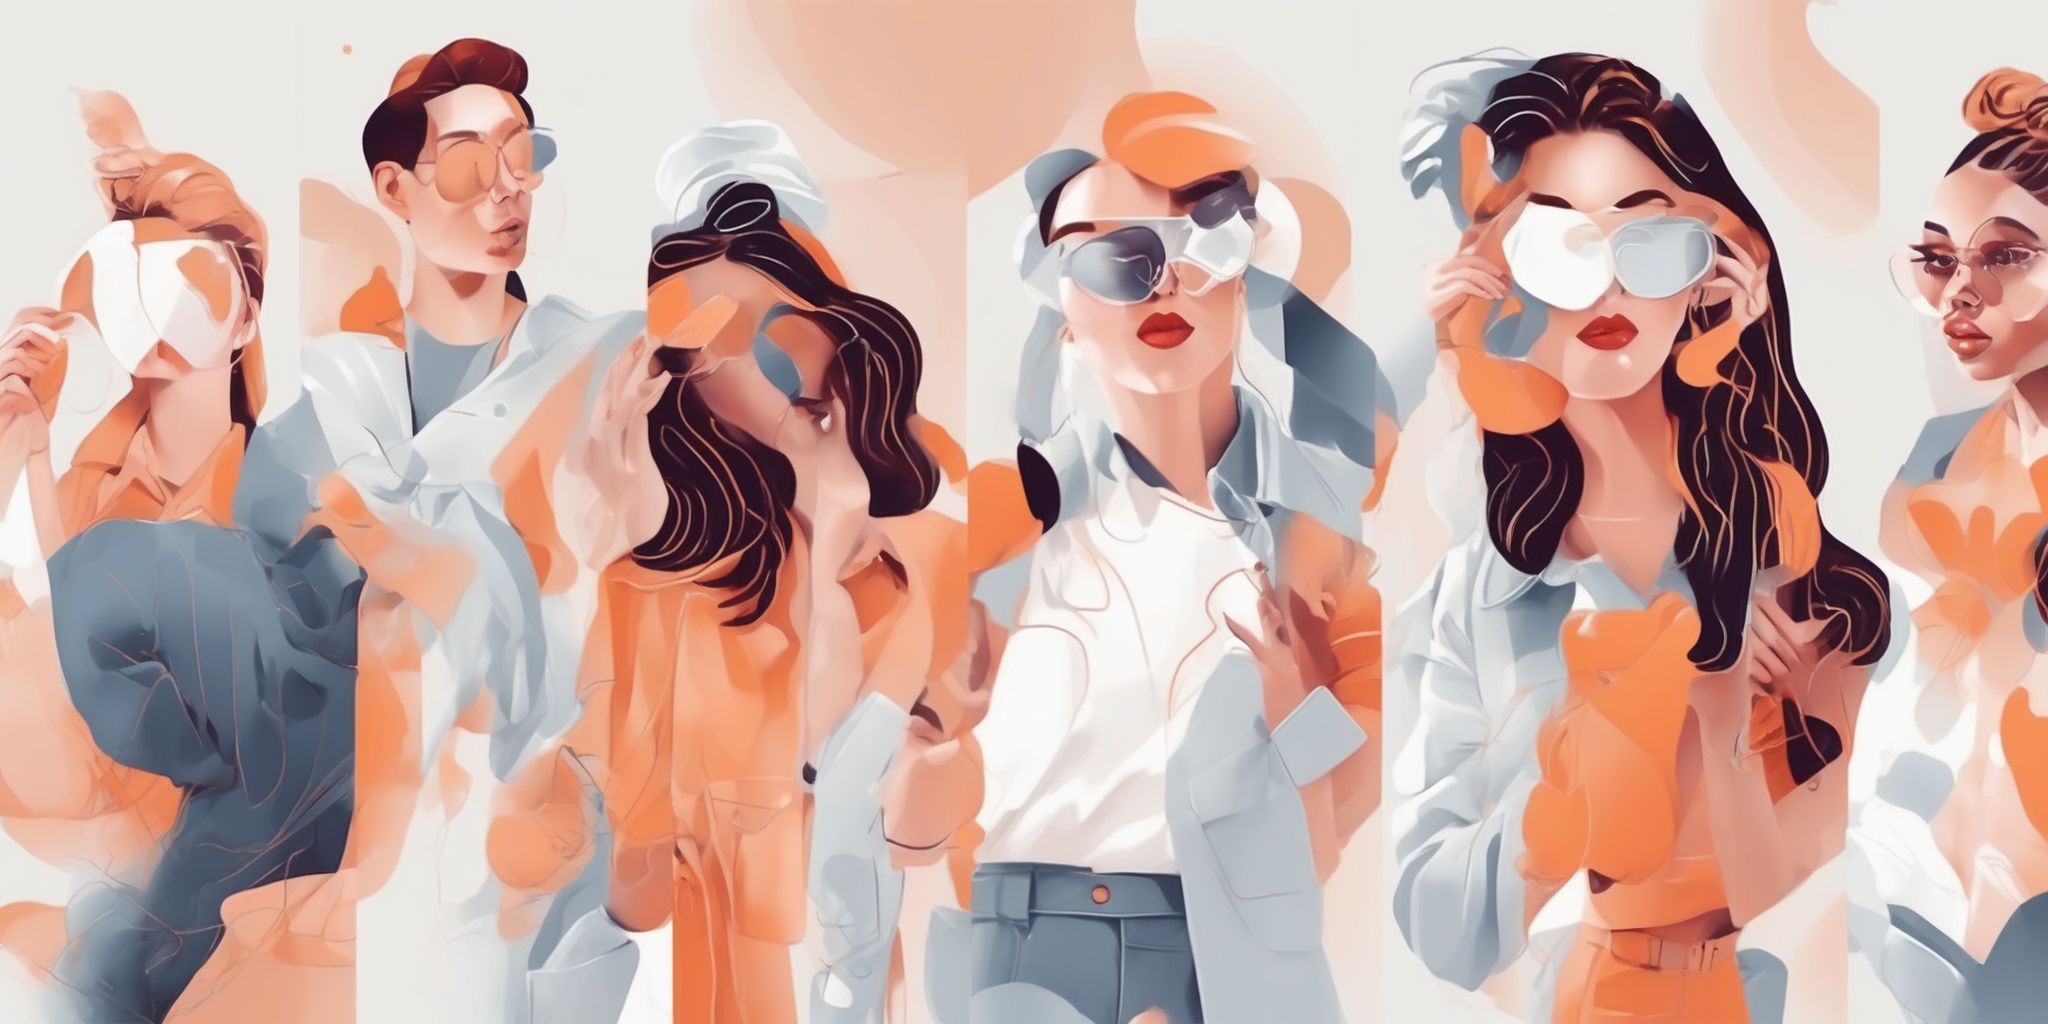 influencers in illustration style with gradients and white background